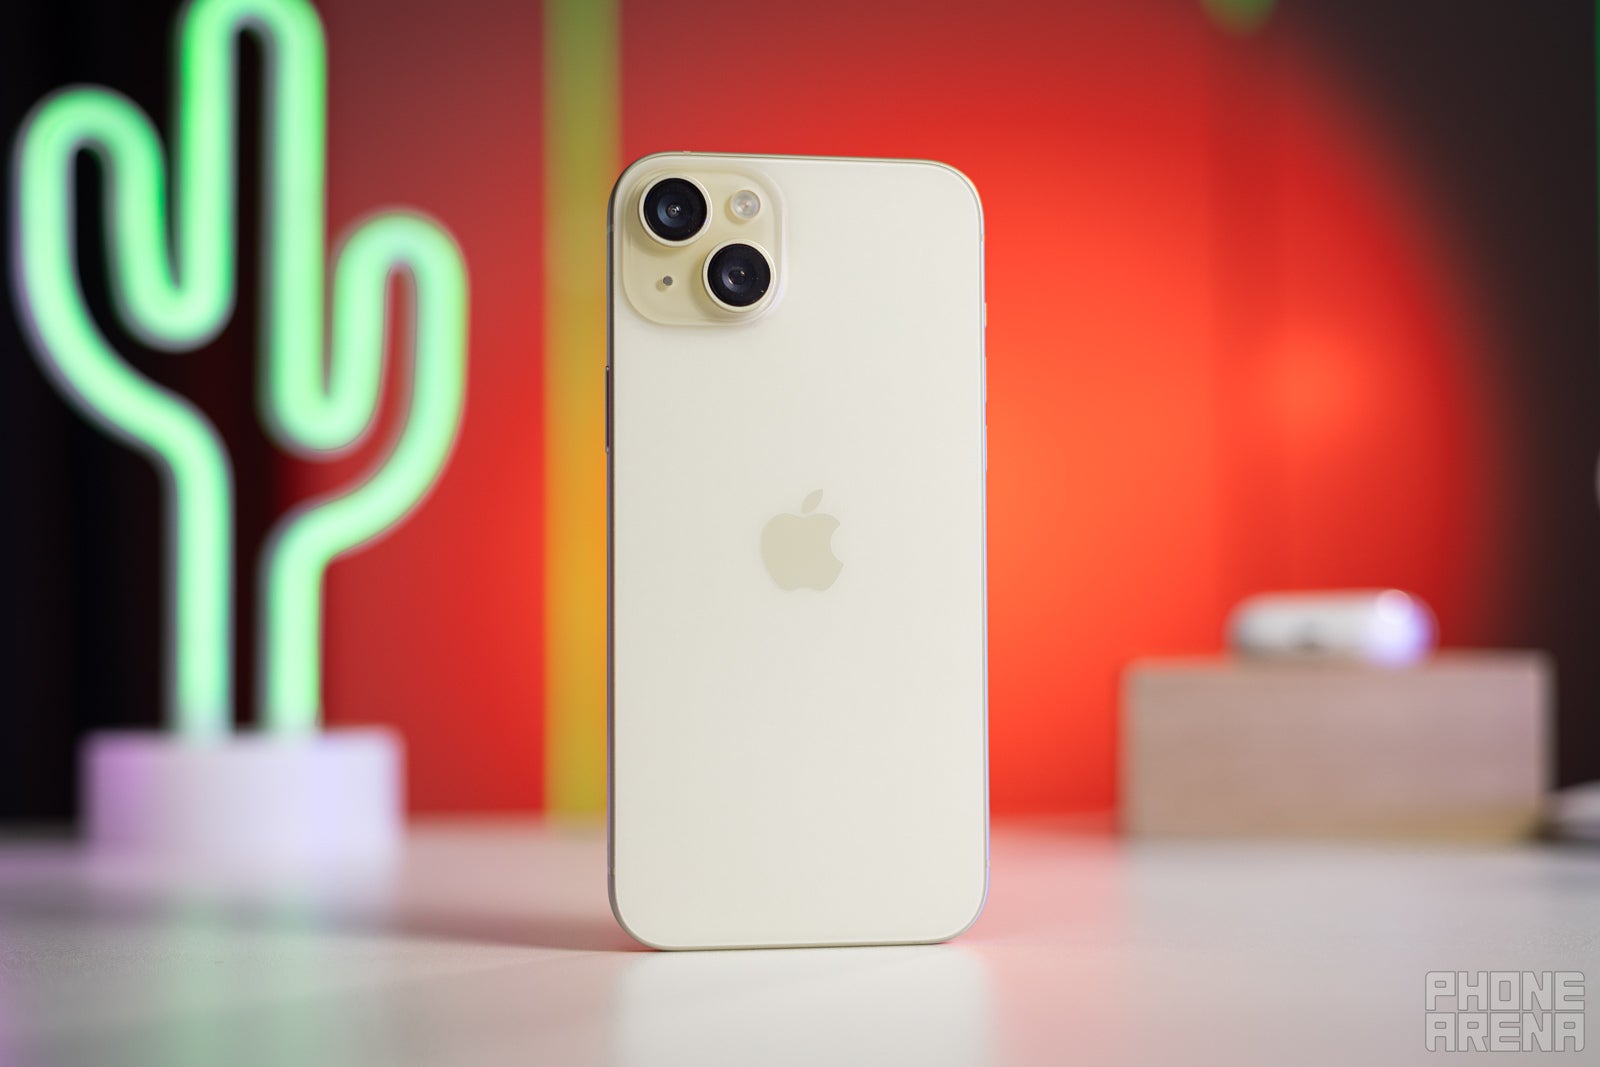 Apple iPhone 15 Plus Review